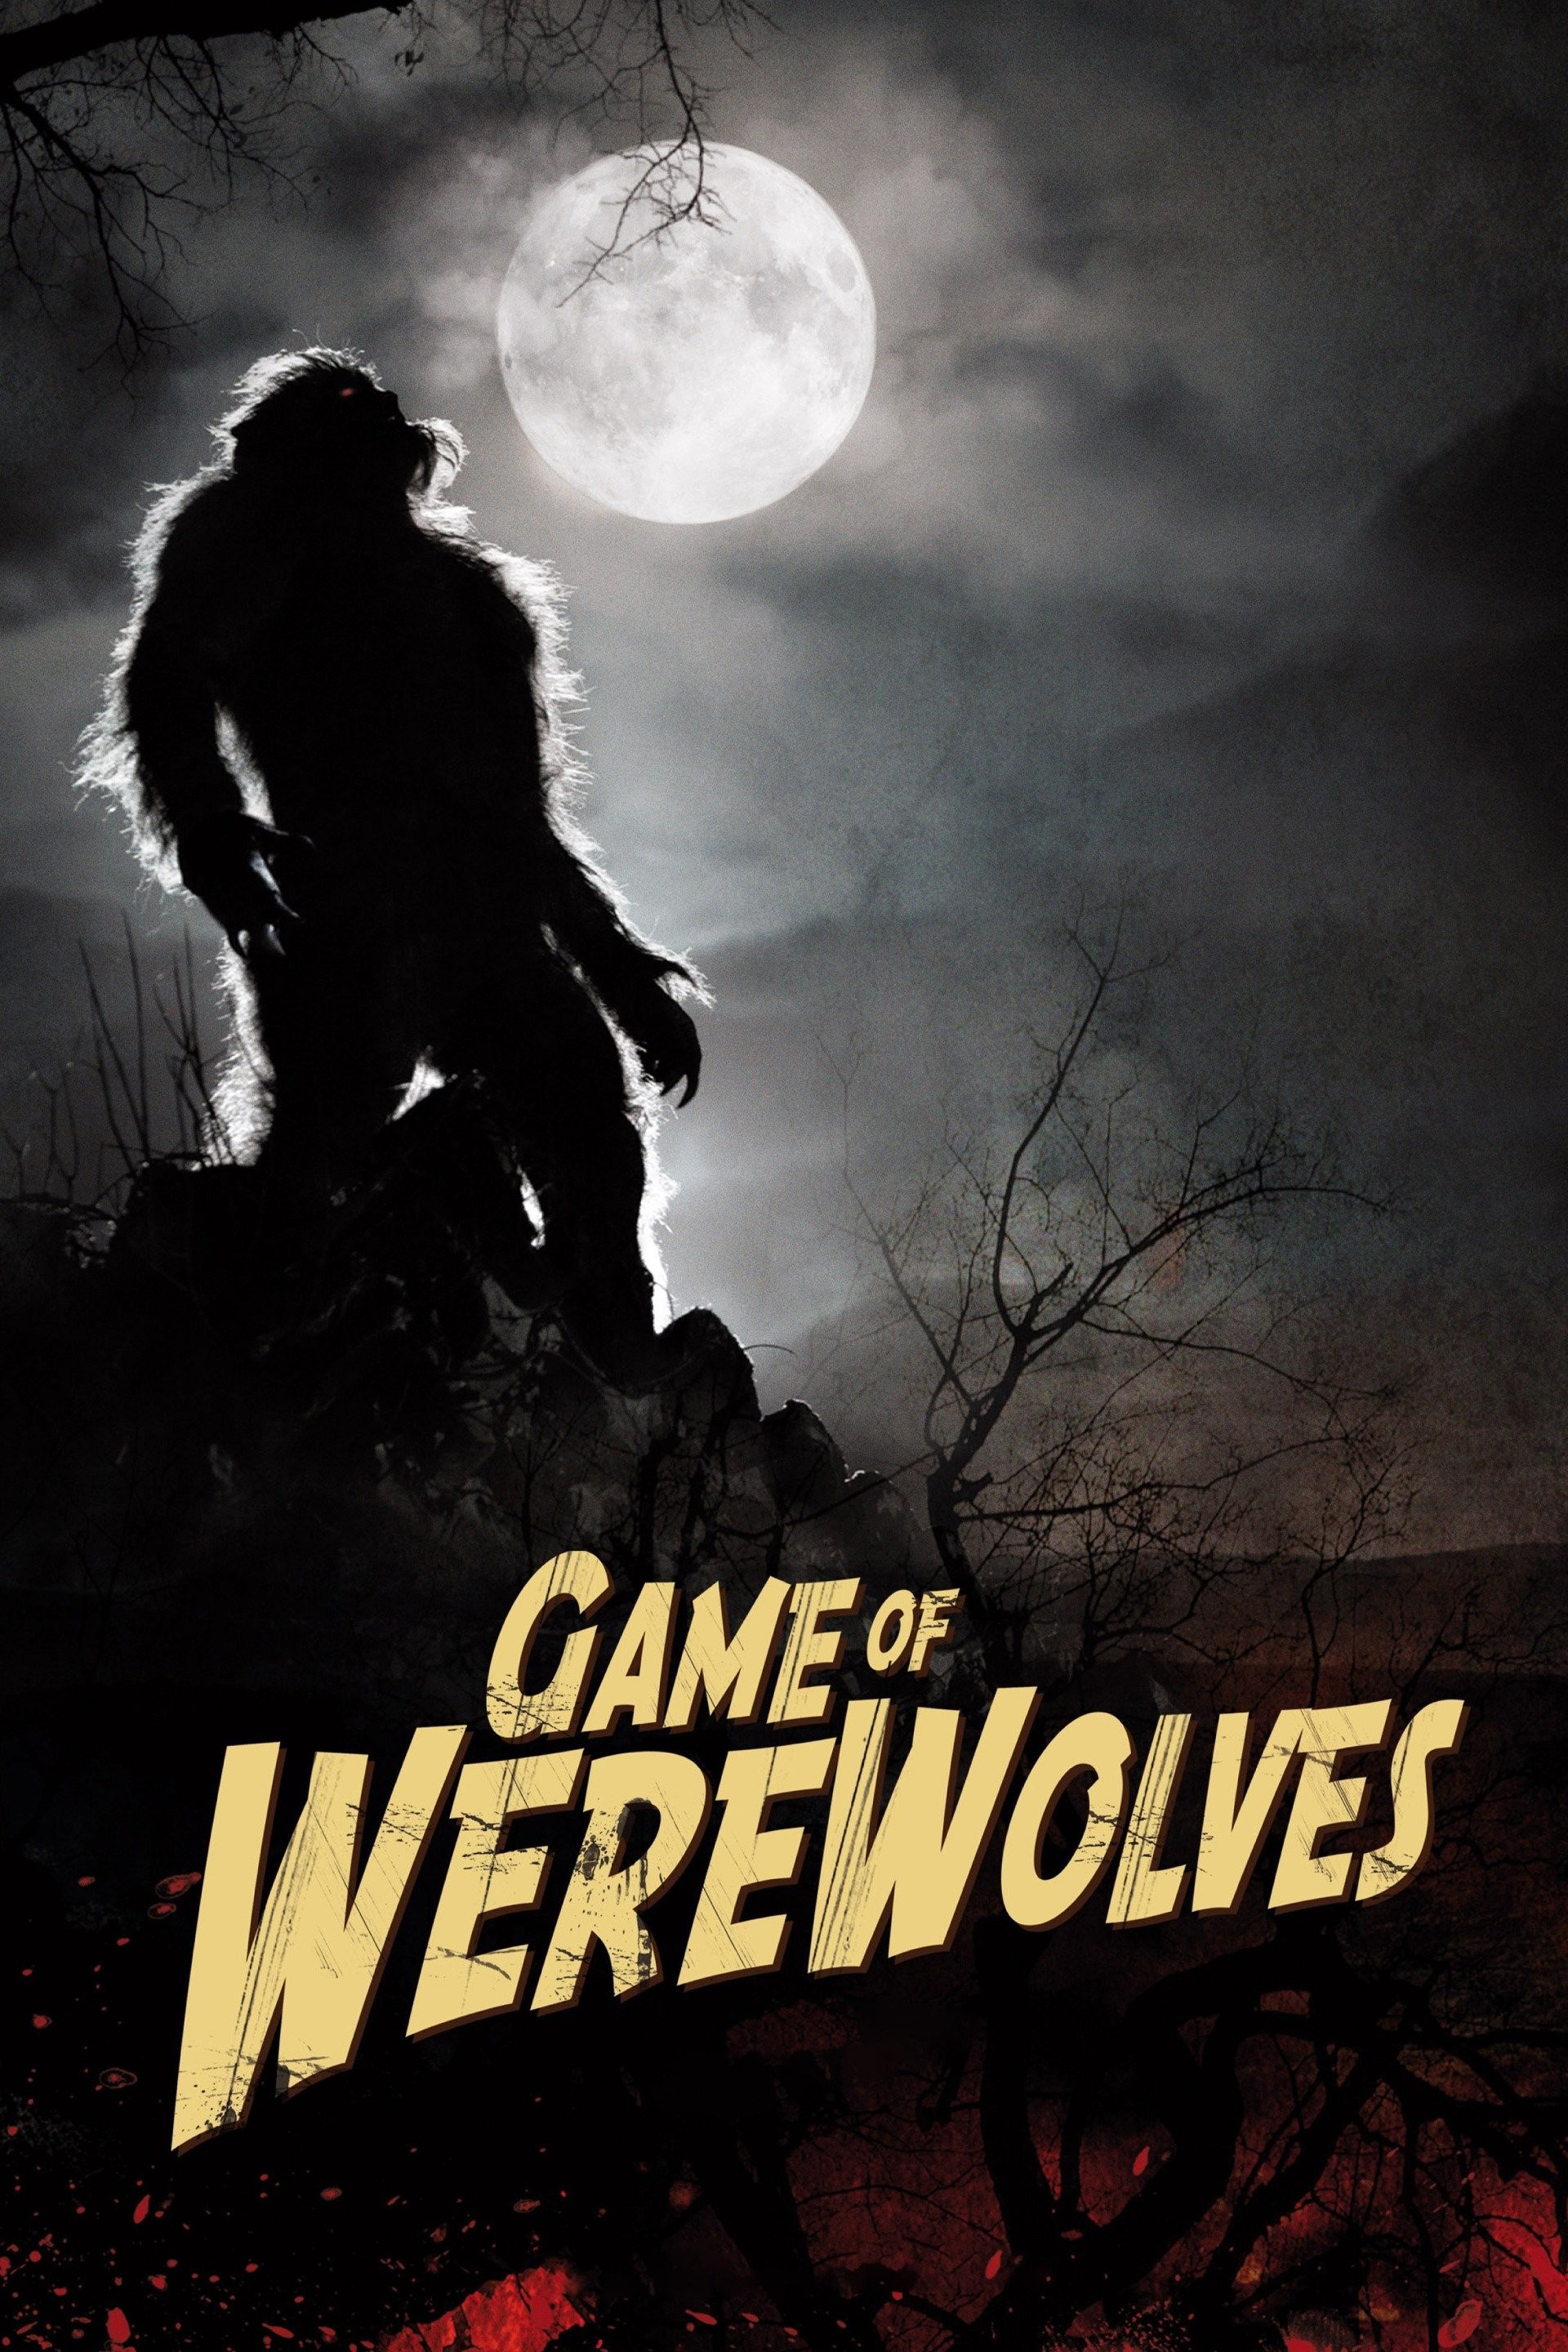 The Curse of the Werewolf - Rotten Tomatoes